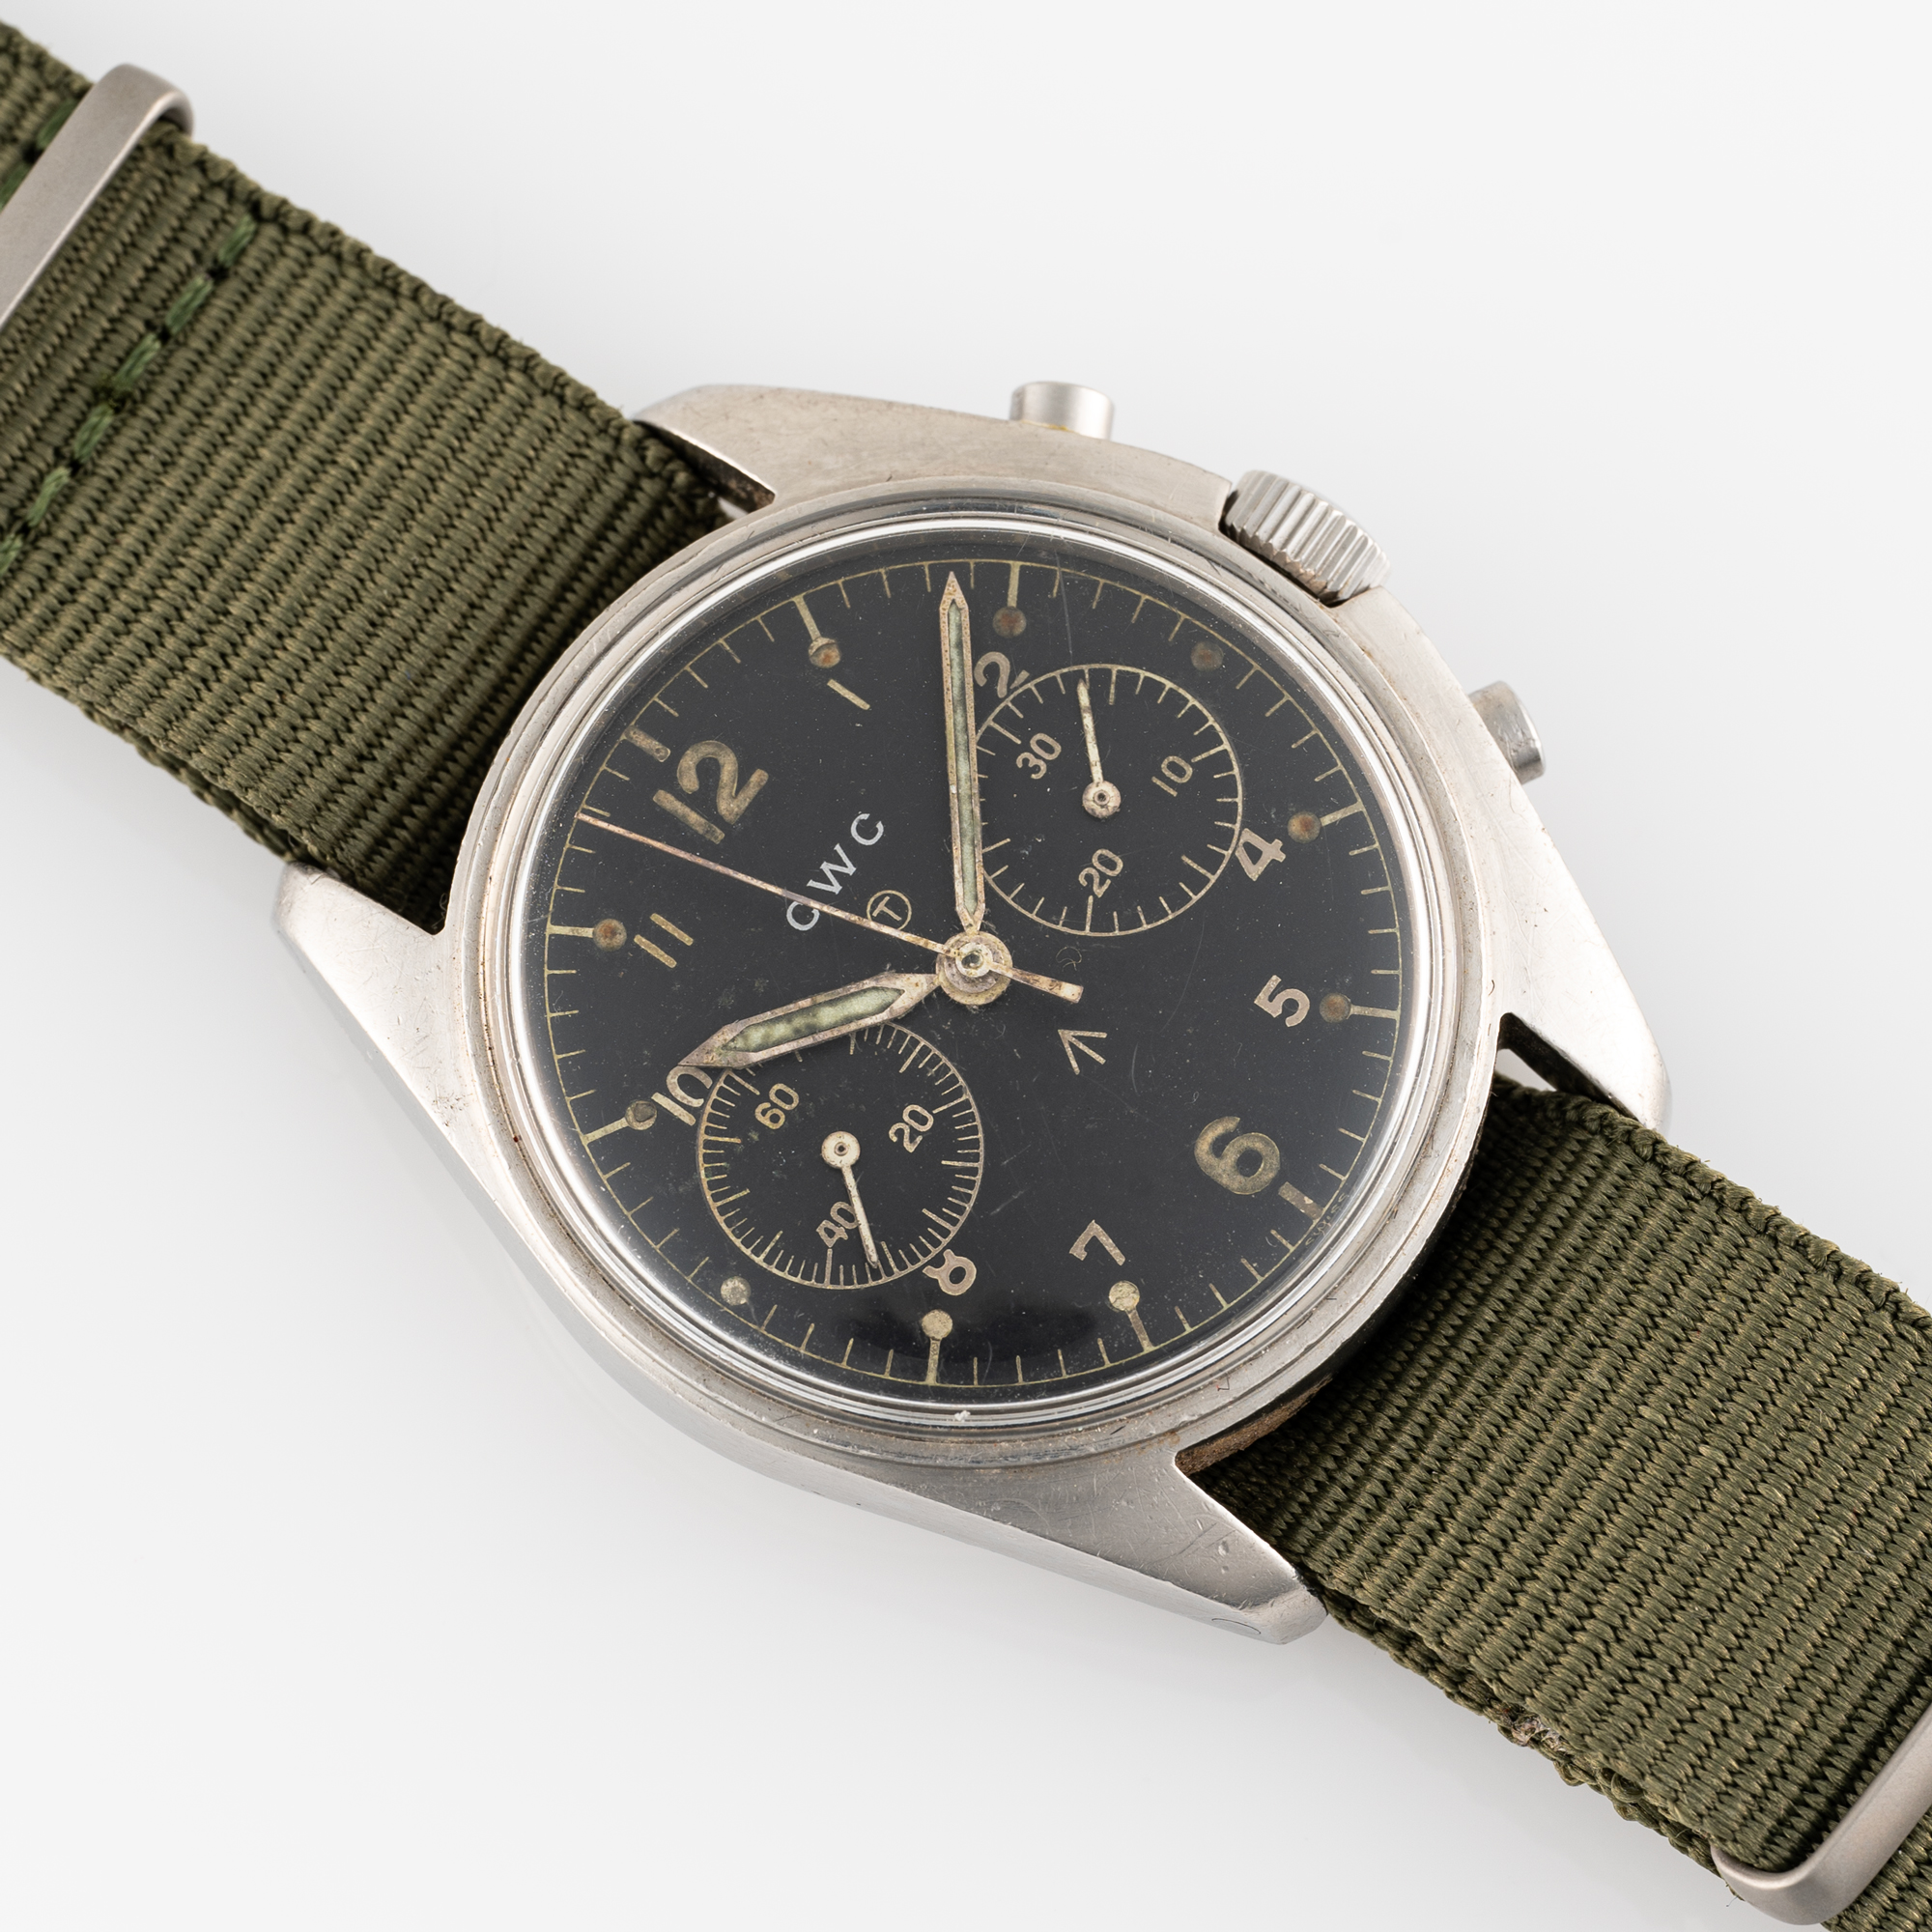 A GENTLEMAN'S STAINLESS STEEL BRITISH MILITARY CWC ROYAL NAVY PILOTS CHRONOGRAPH WRIST WATCH DATED - Image 3 of 7